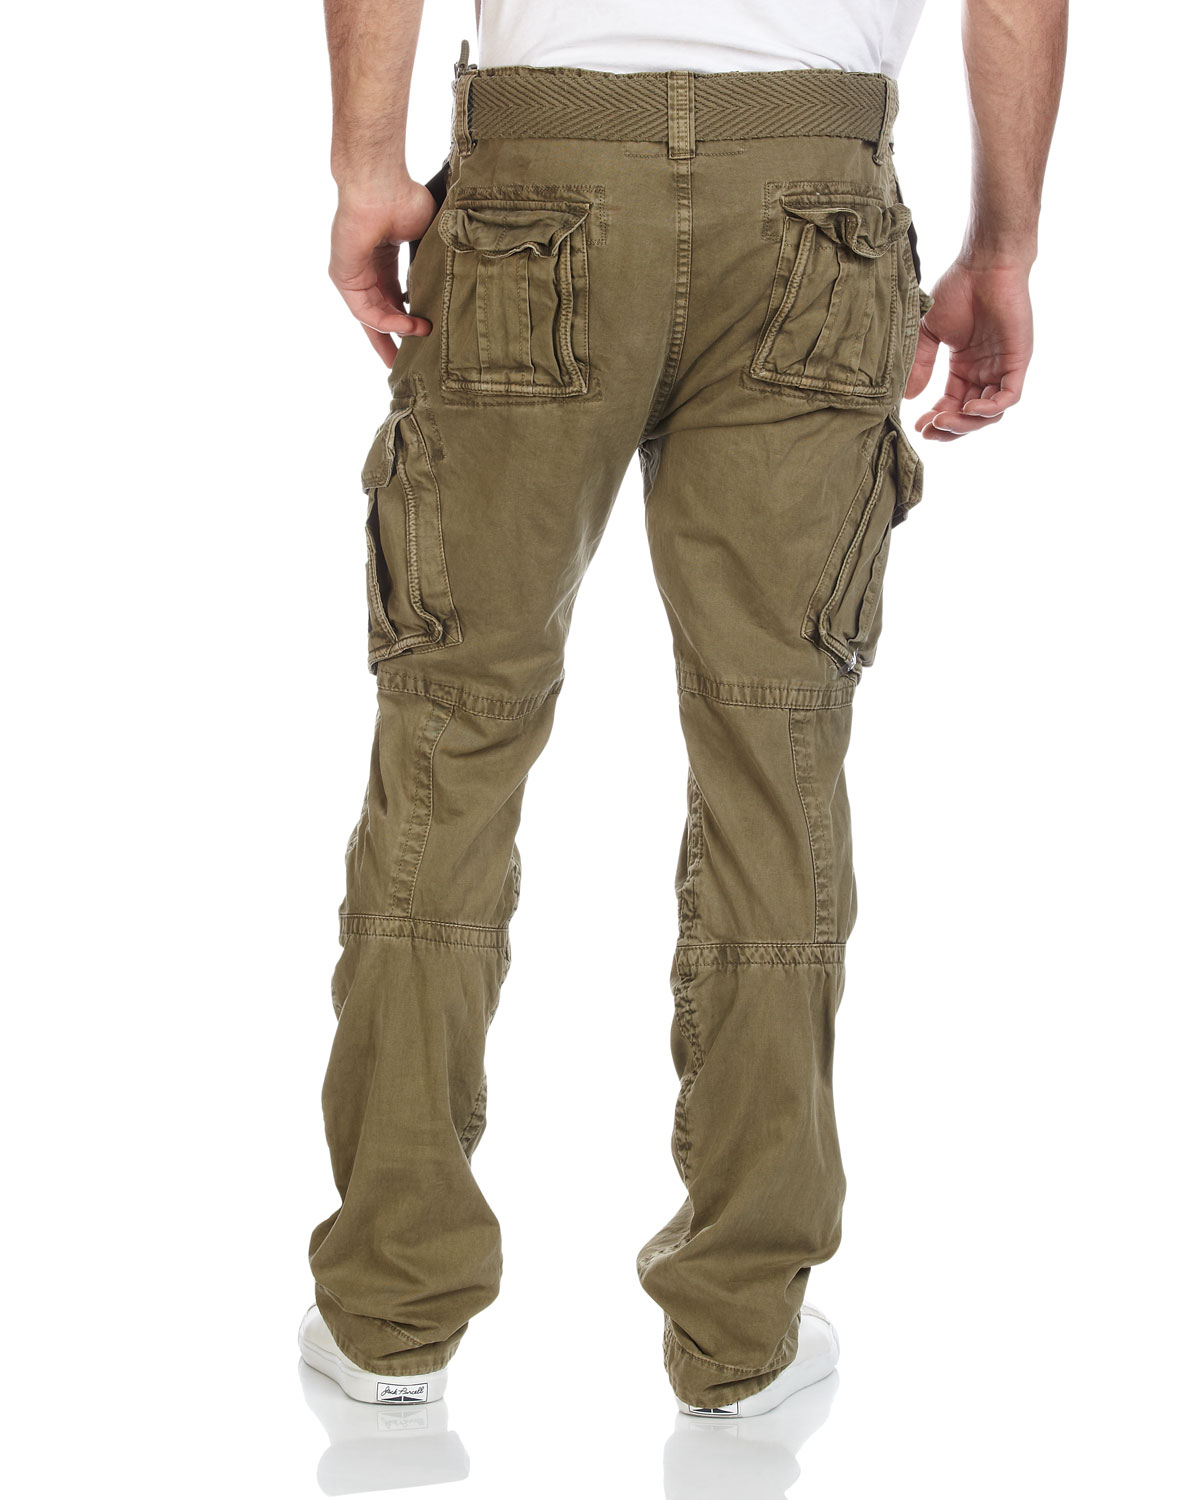 Lyst - Superdry Cargo Pants in Green for Men